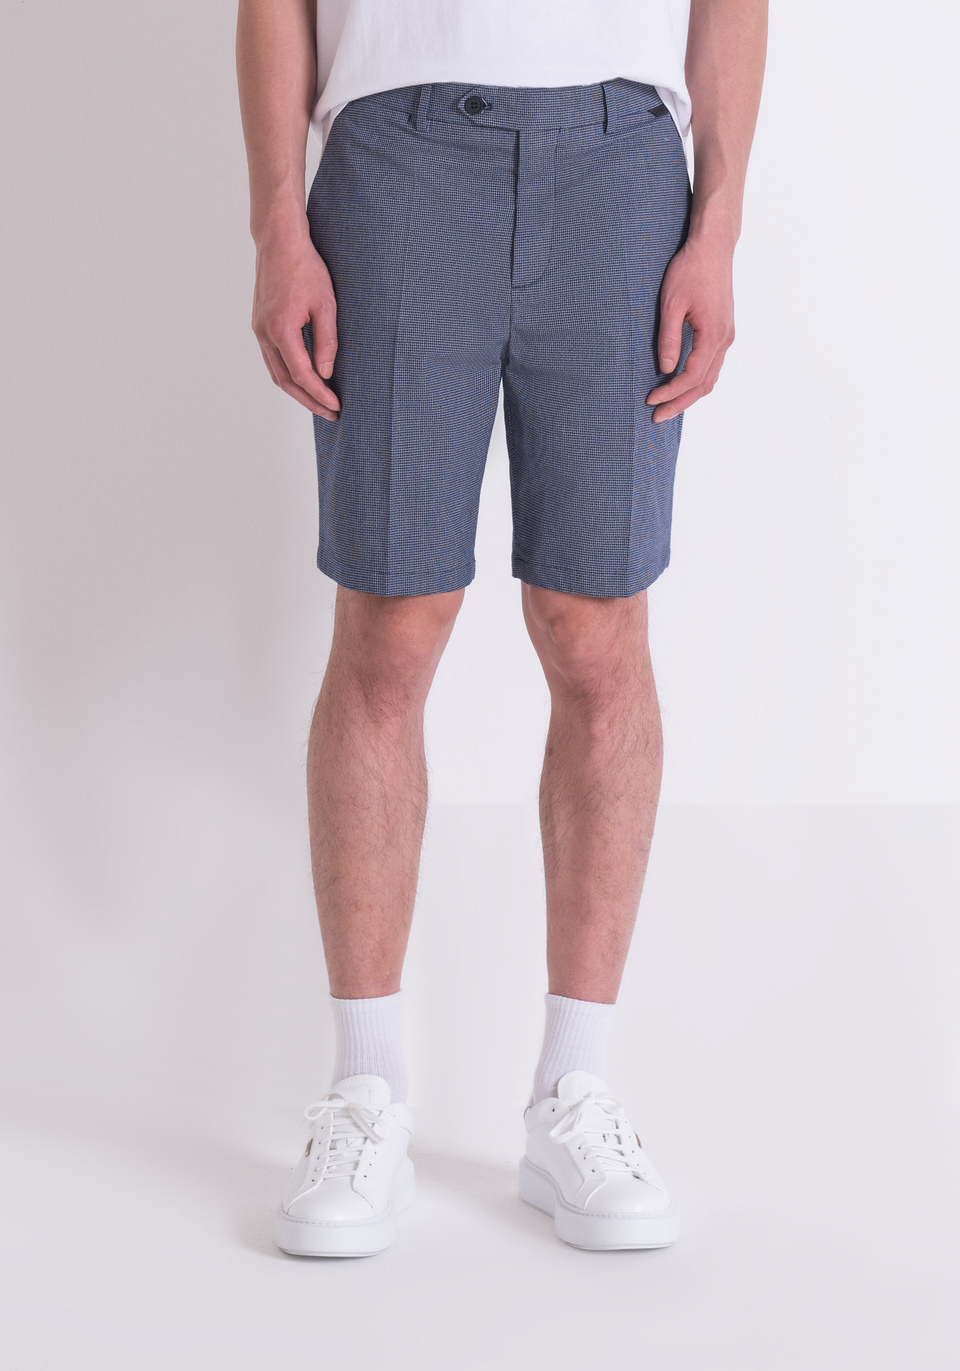 SLIM FIT "MARK" SHORTS IN ARMORED STRETCH COTTON TWILL - Antony Morato Online Shop